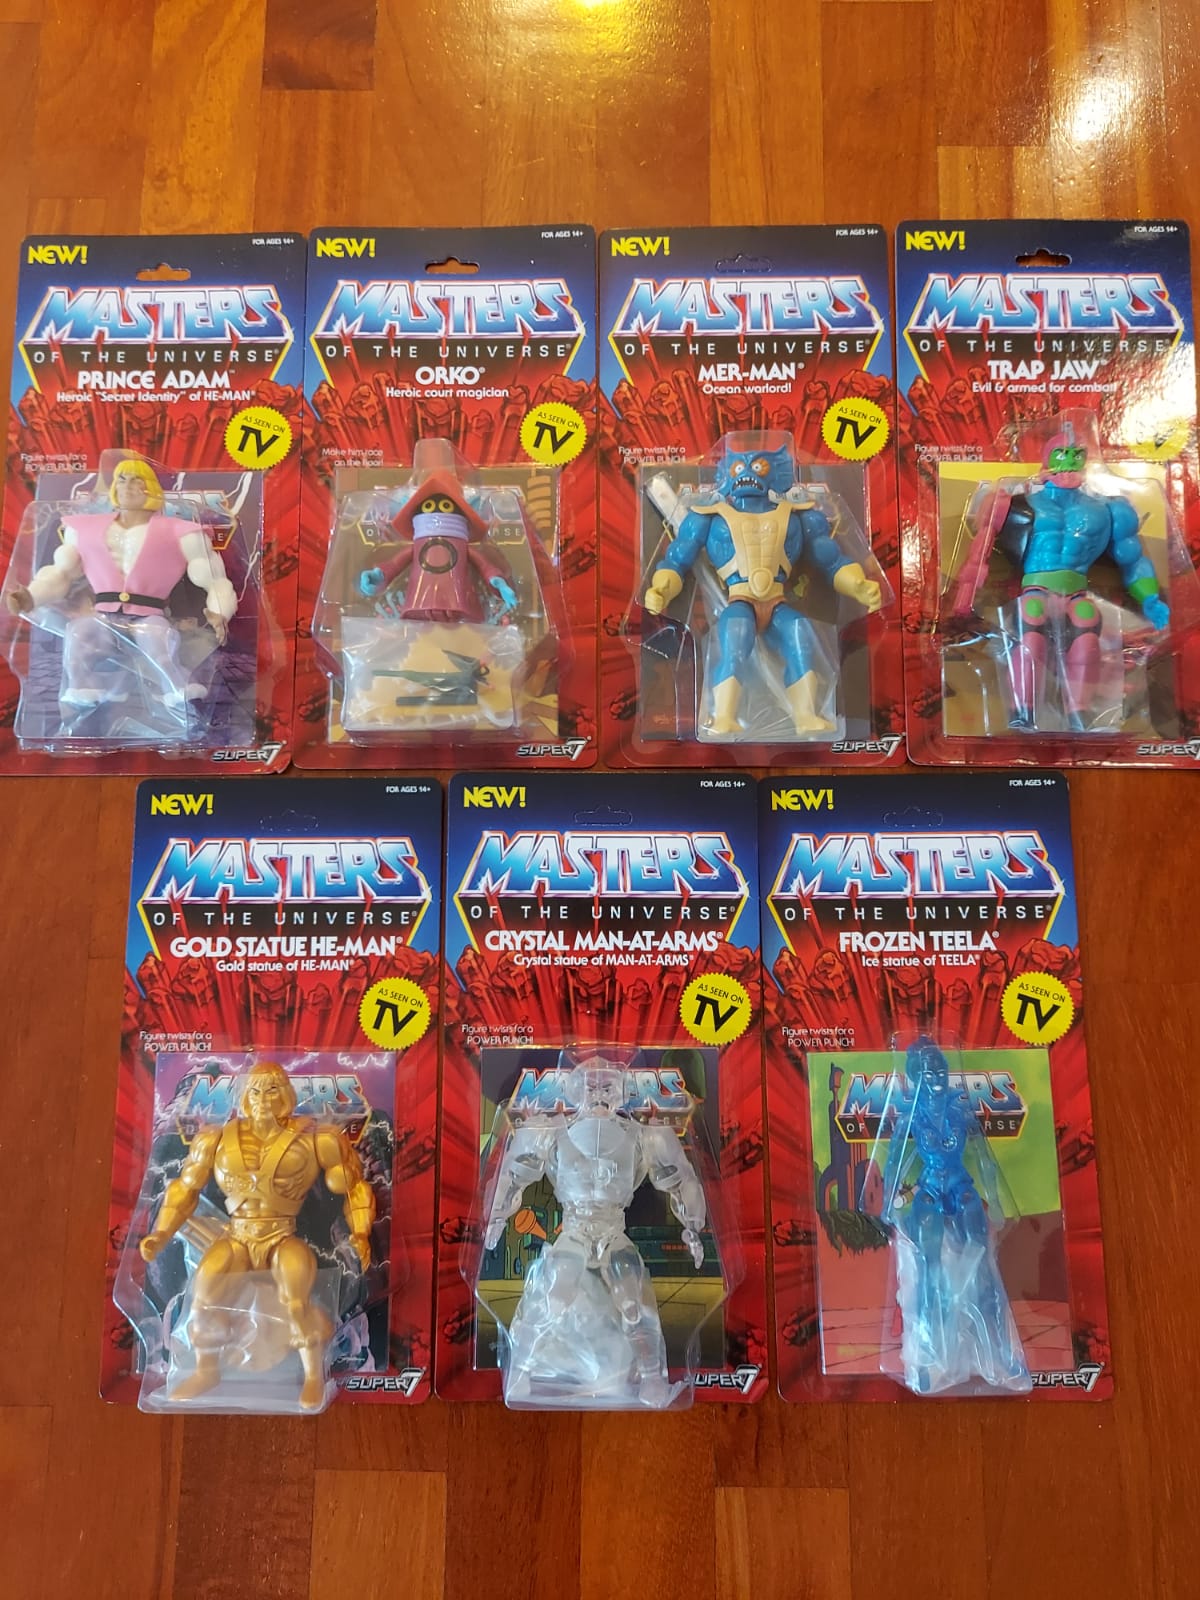 Gold He Man Neo Vintage Collection WAVE 3 SUPER 7 MOTU Masters of the Universe